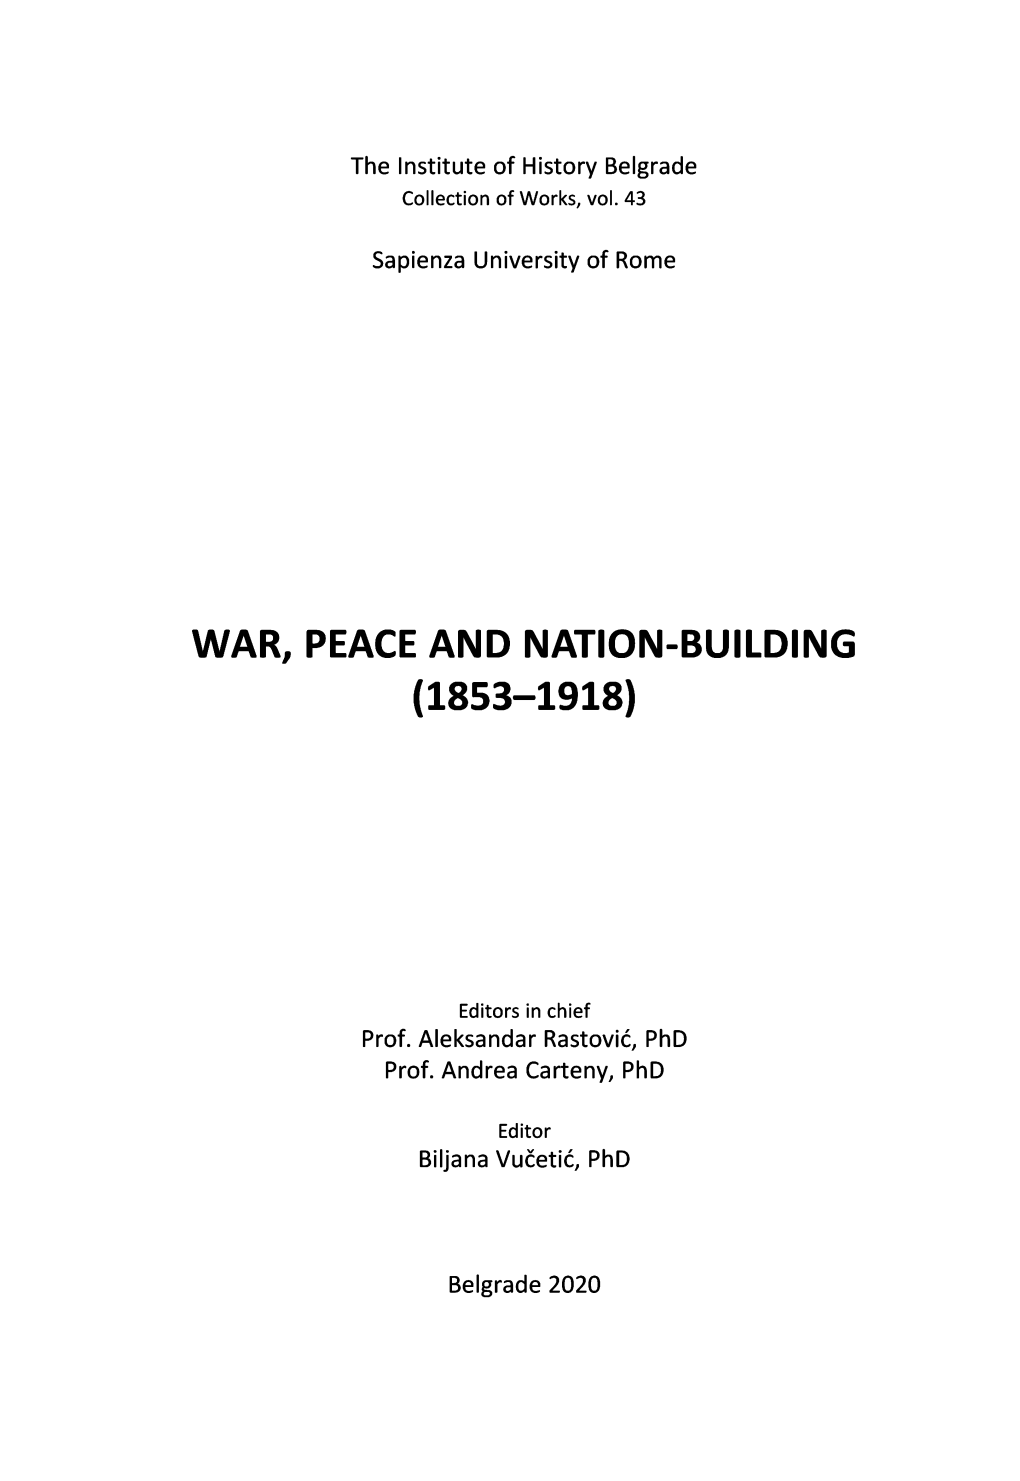 War, Peace and Nation-Building : (1853-1918) : Collection of Papers